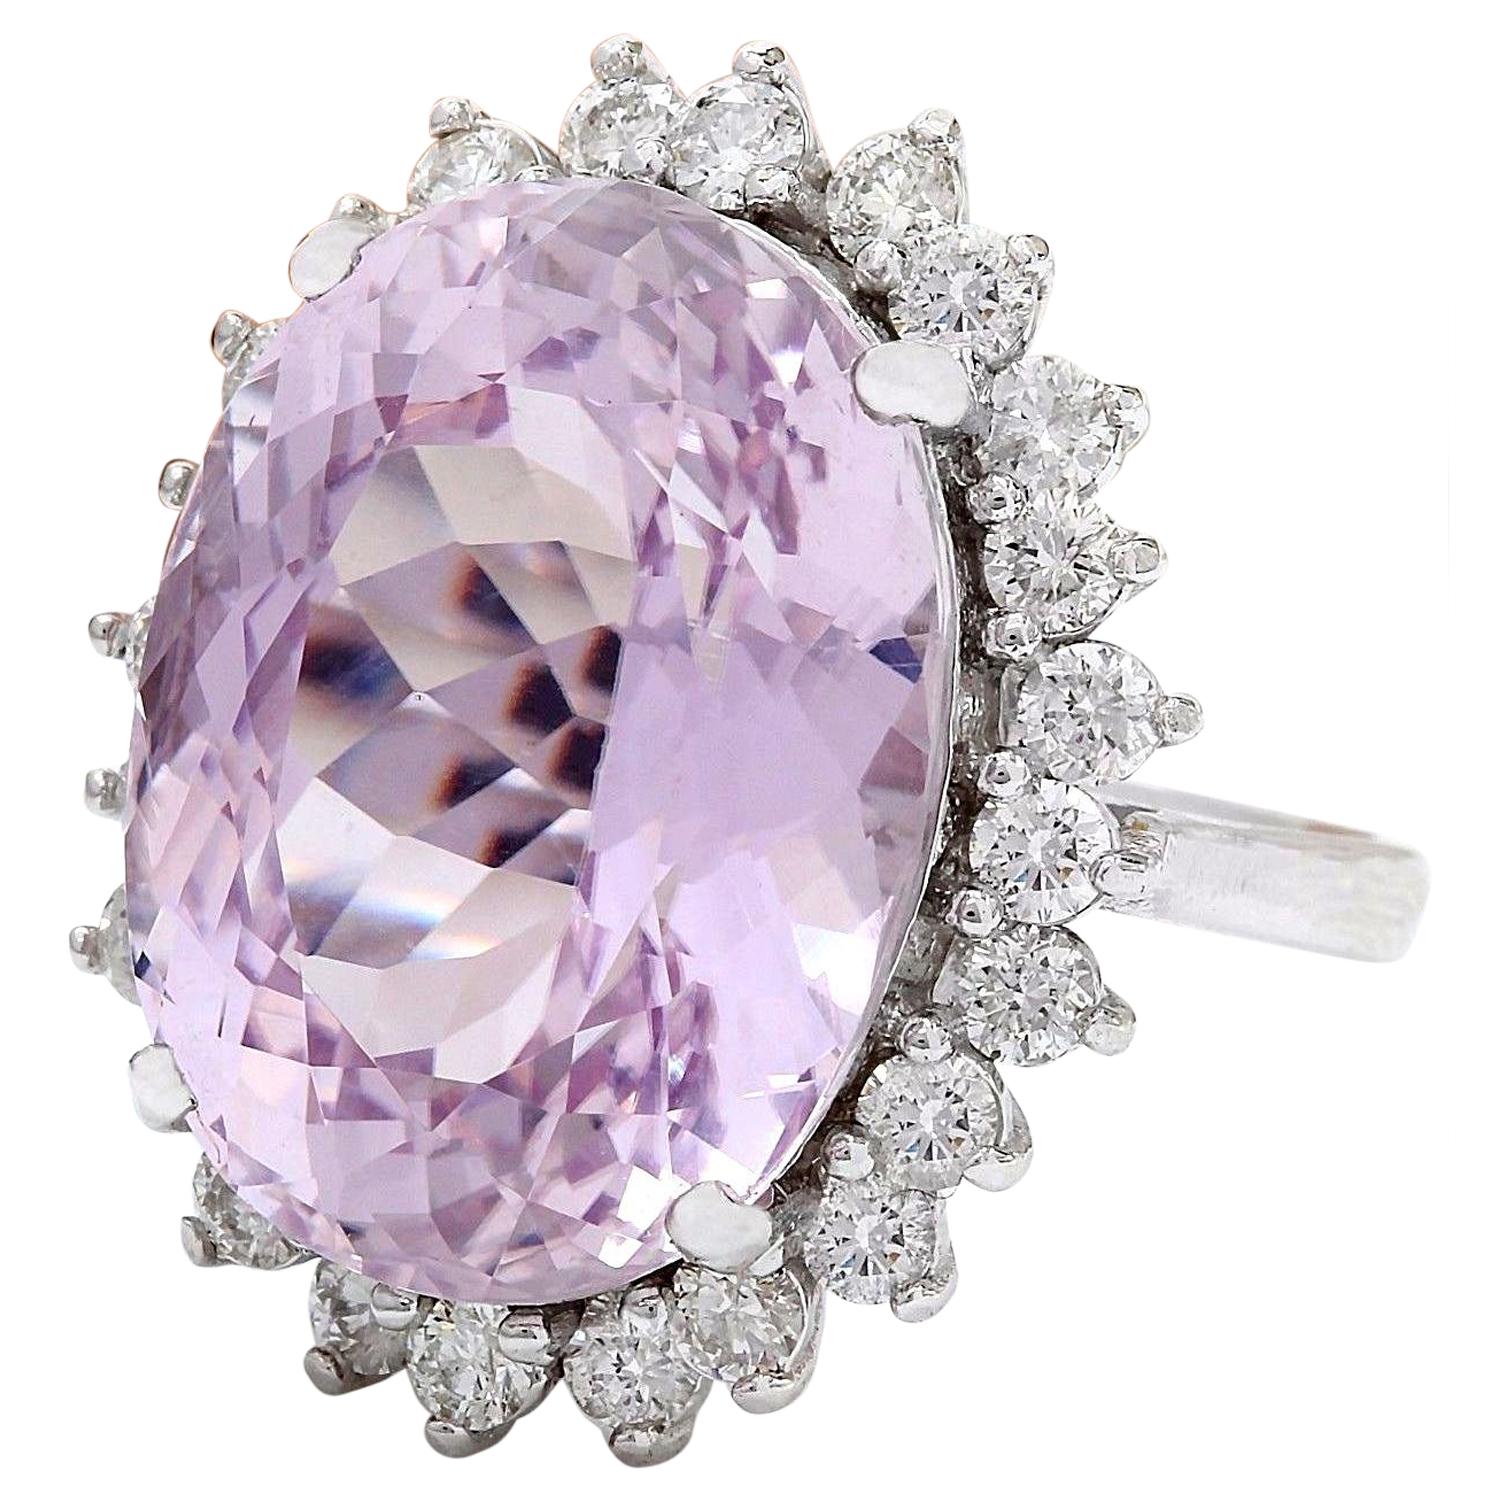 24.08 Carat Natural Kunzite 14K Solid White Gold Diamond Ring
 Item Type: Ring
 Item Style: Cocktail
 Material: 14K White Gold
 Mainstone: Kunzite
 Stone Color: Pink
 Stone Weight: 22.58 Carat
 Stone Shape: Oval
 Stone Quantity: 1
 Stone Dimensions: